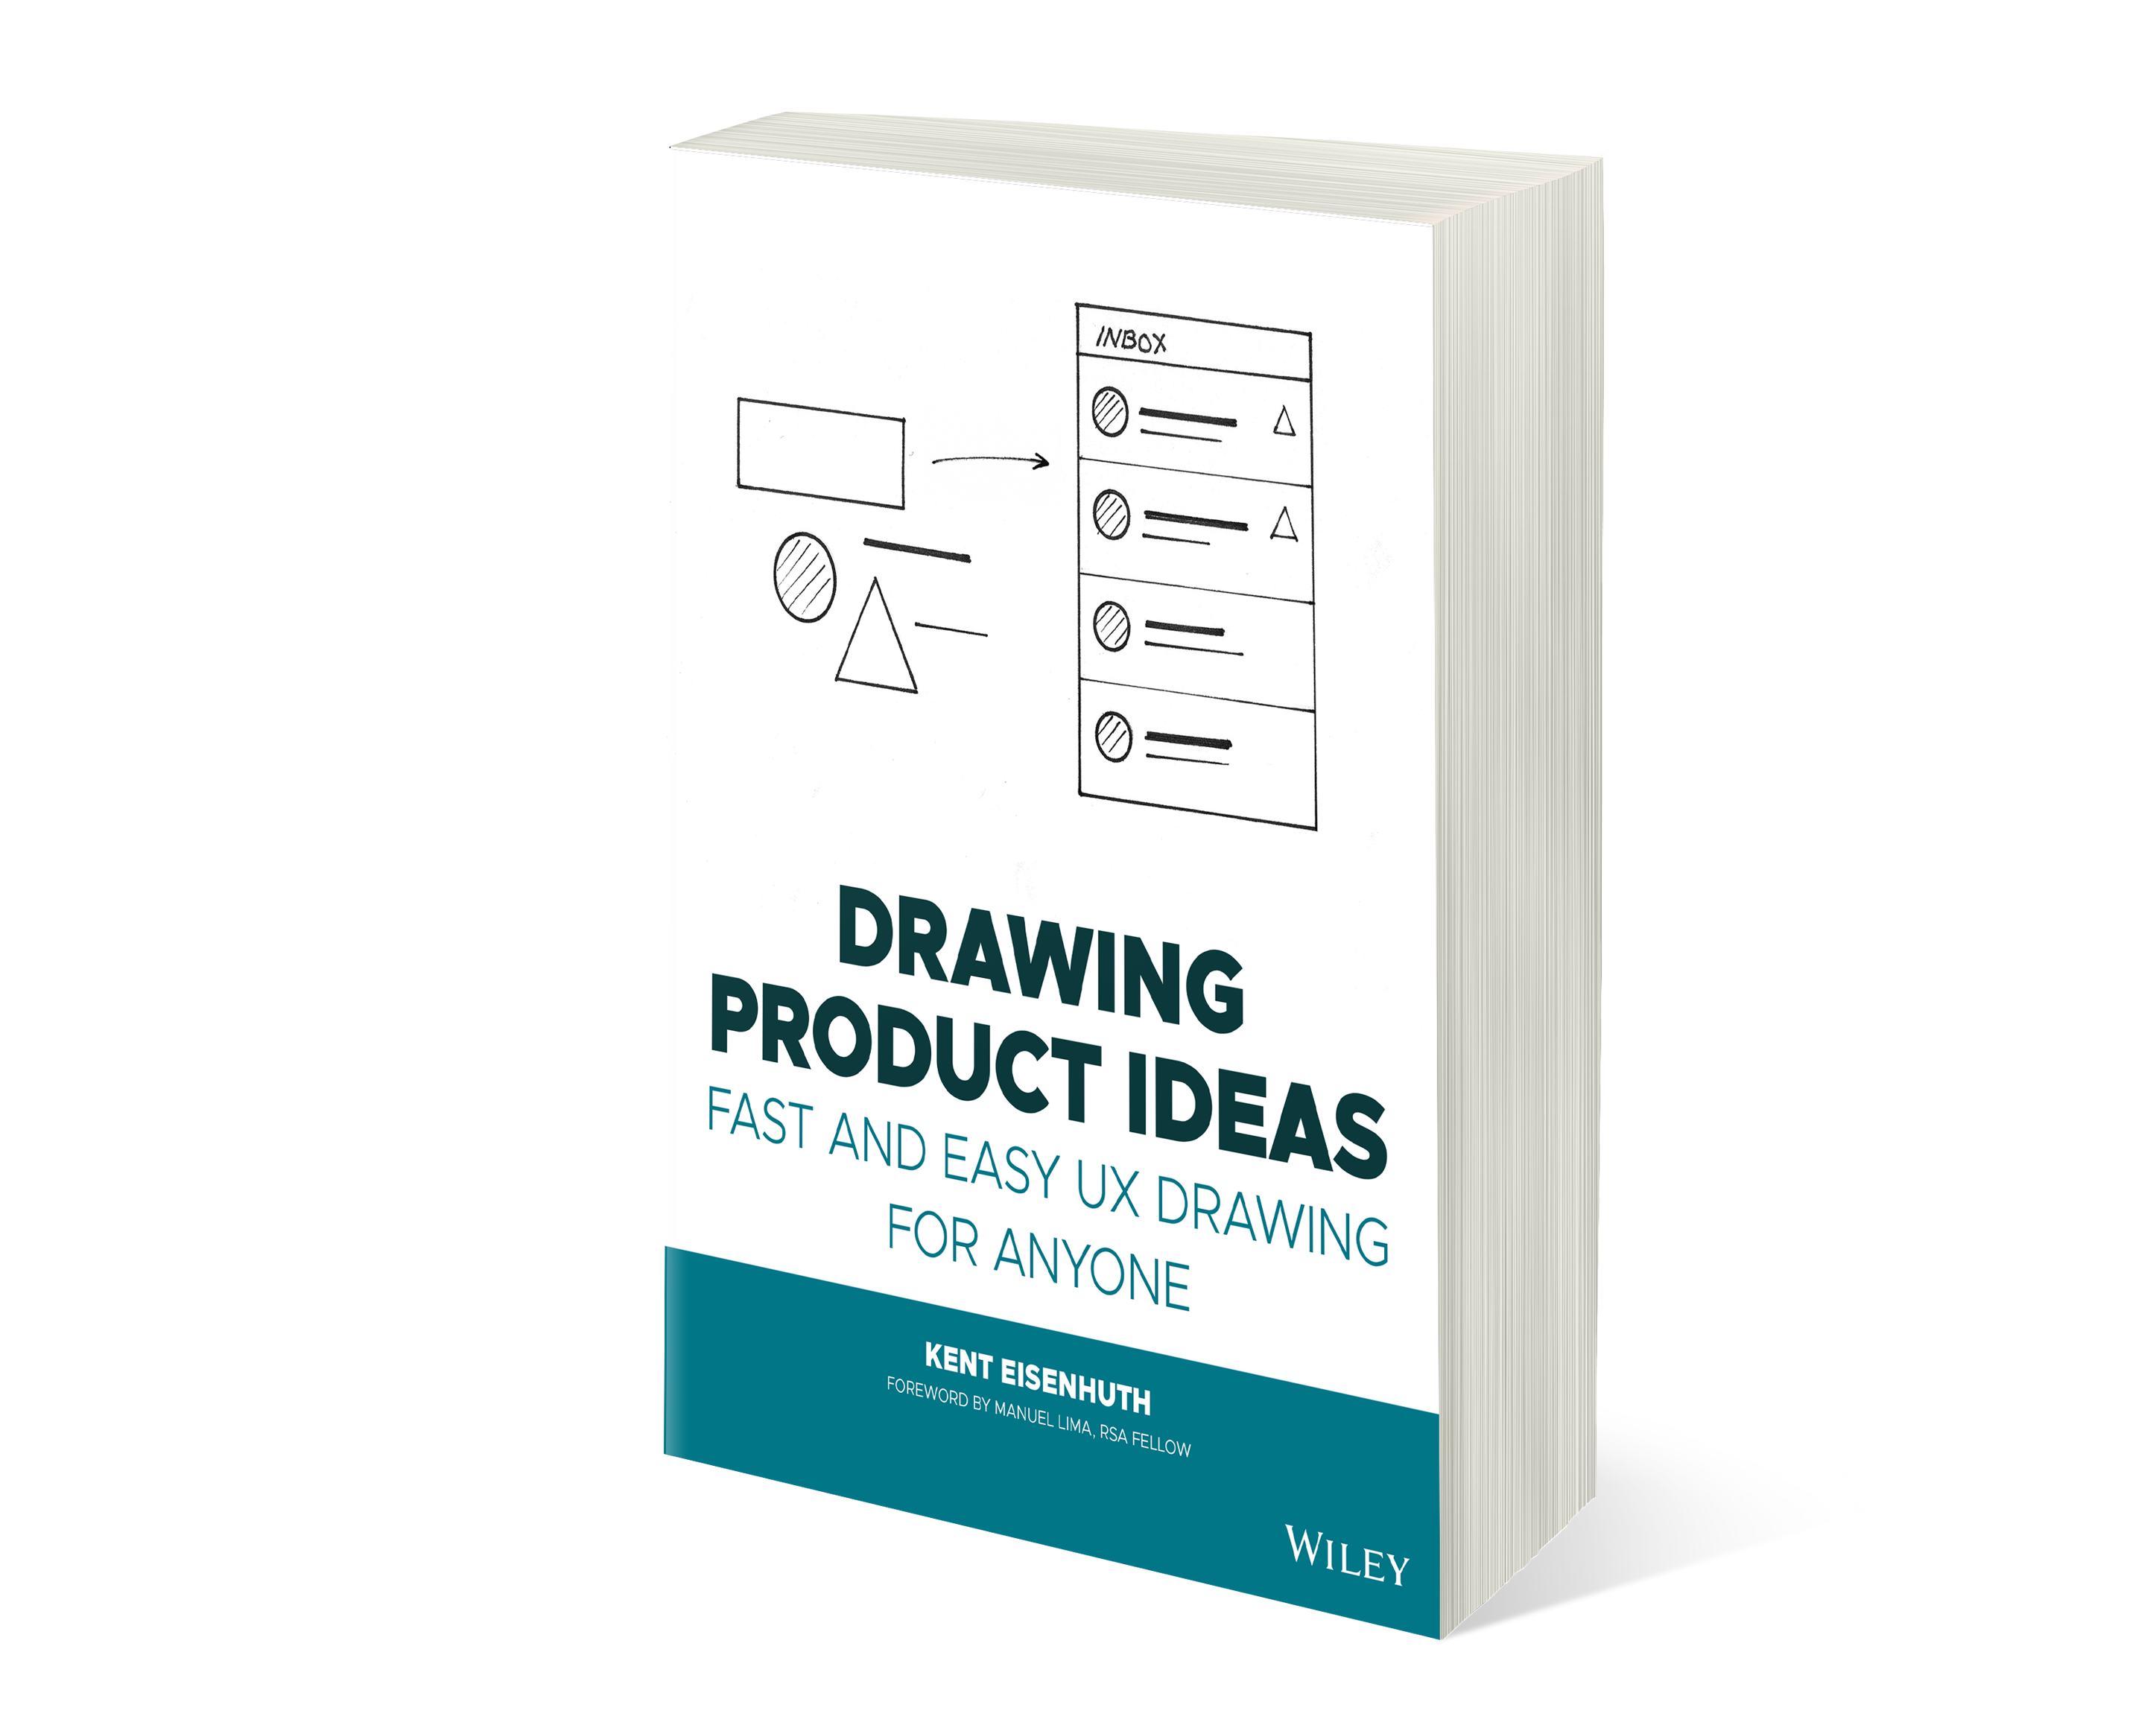 UX Drawings from Drawing Product Ideas